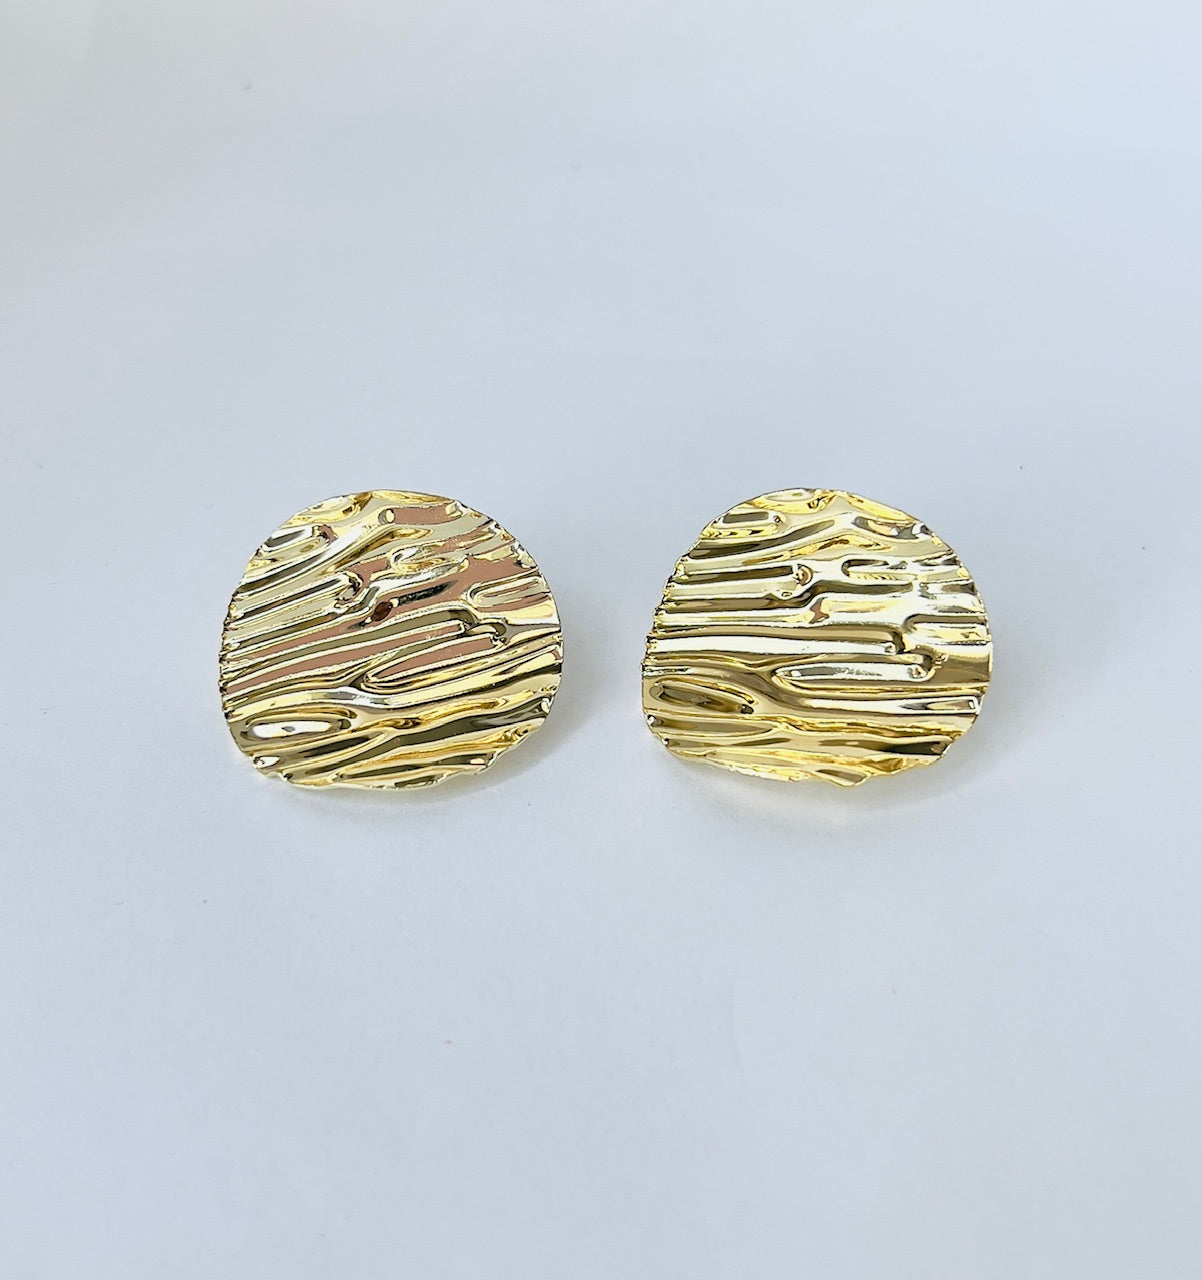 Exquisitely crafted, these large corrugated earrings are gold plated and perfect for women seeking unique, elegant jewelry